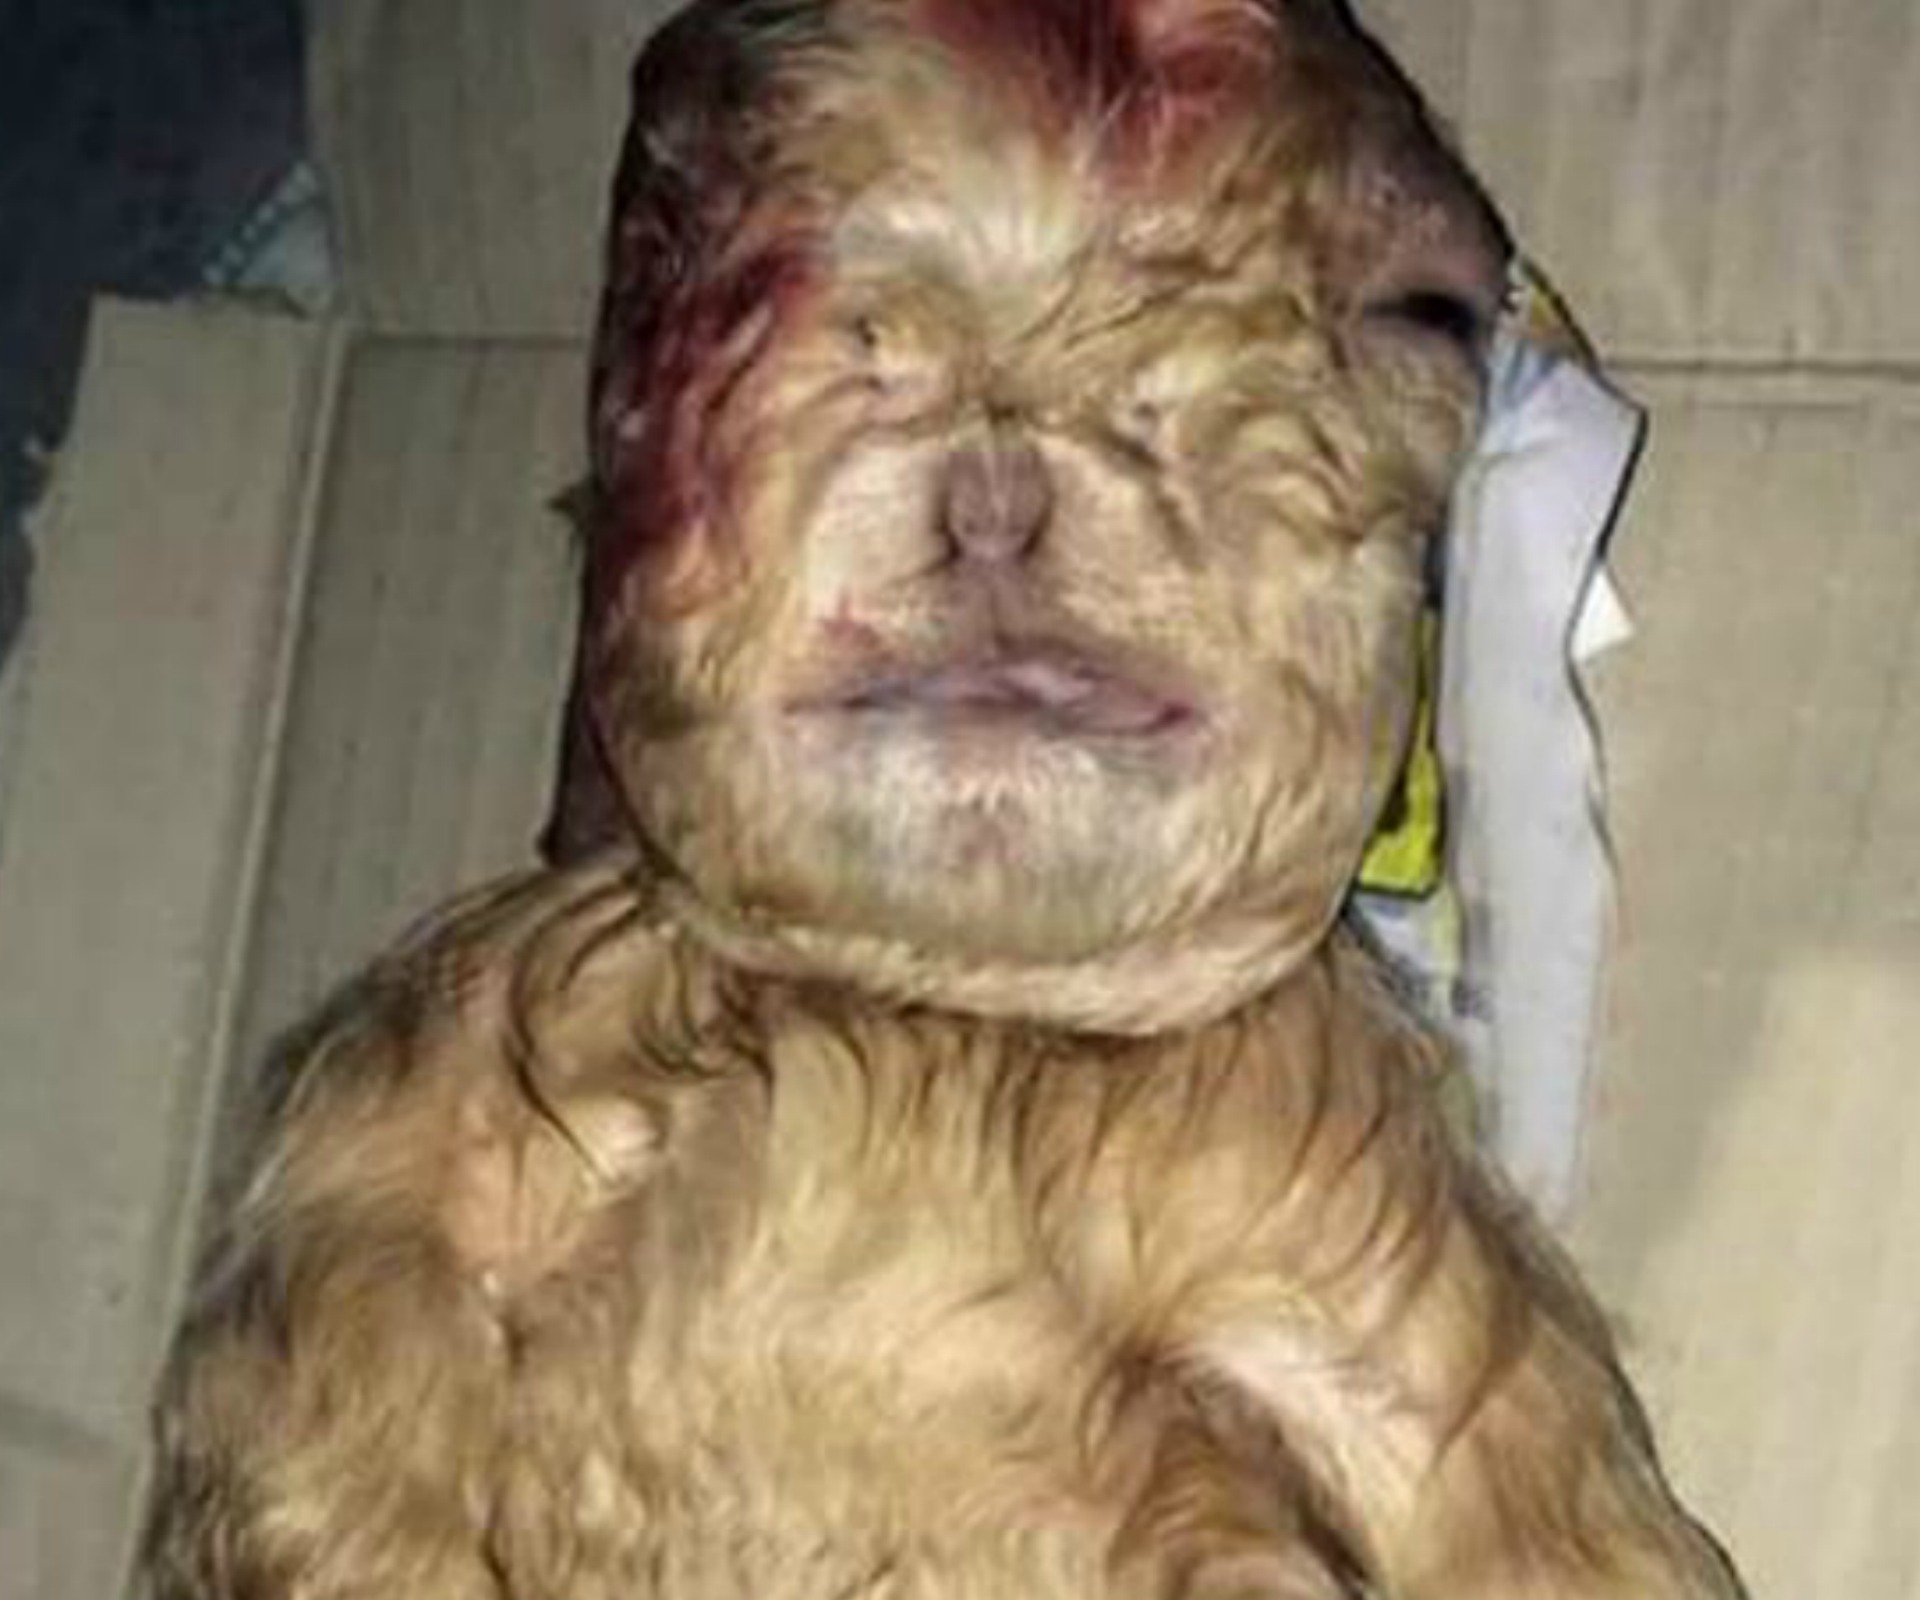 Strange baby goat born with human-like features sparks investigation